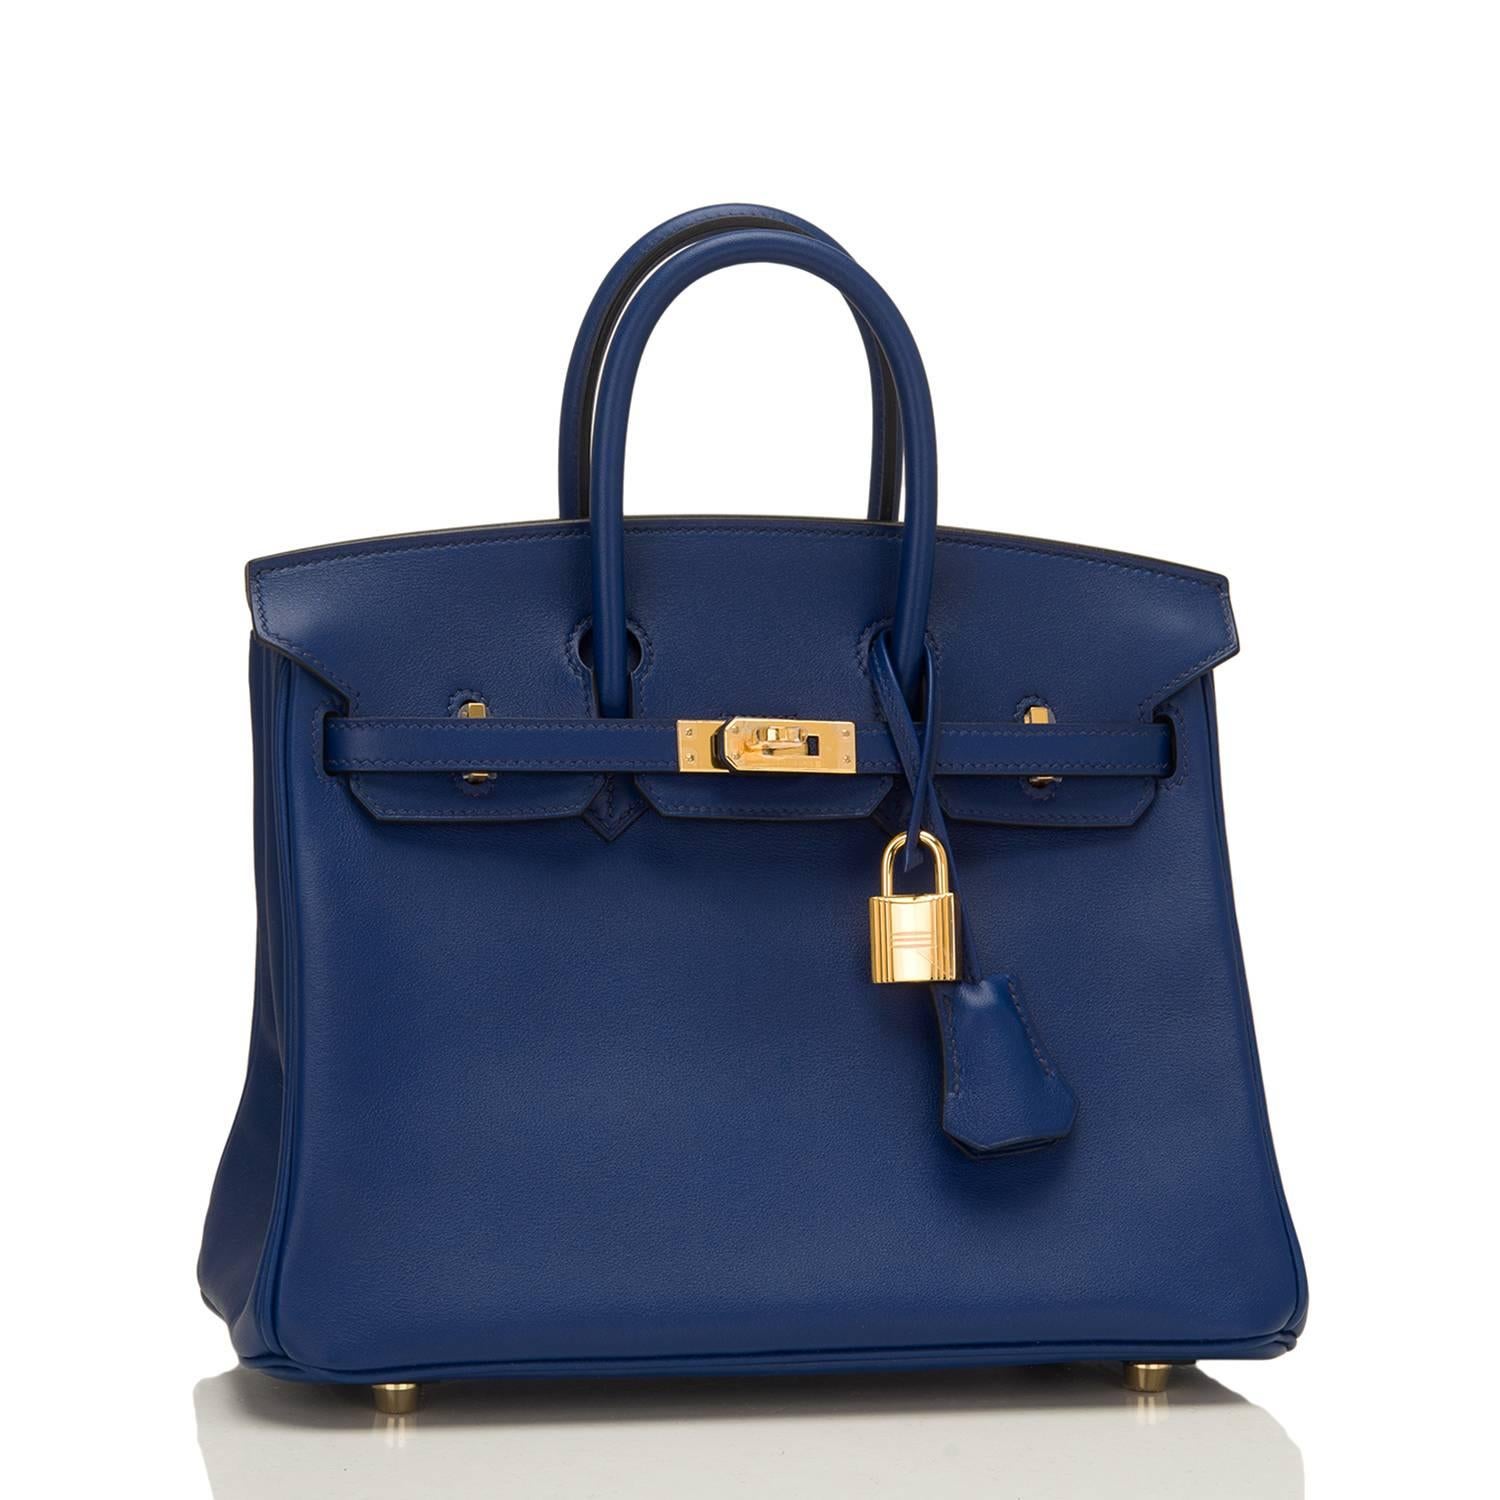 Hermes Blue Sapphire Birkin 25cm of swift leather with gold hardware.

This Birkin has tonal stitching, a front toggle closure, a clochette with lock and two keys, and double rolled handles.

The interior is lined with Blue Sapphire chevre and has